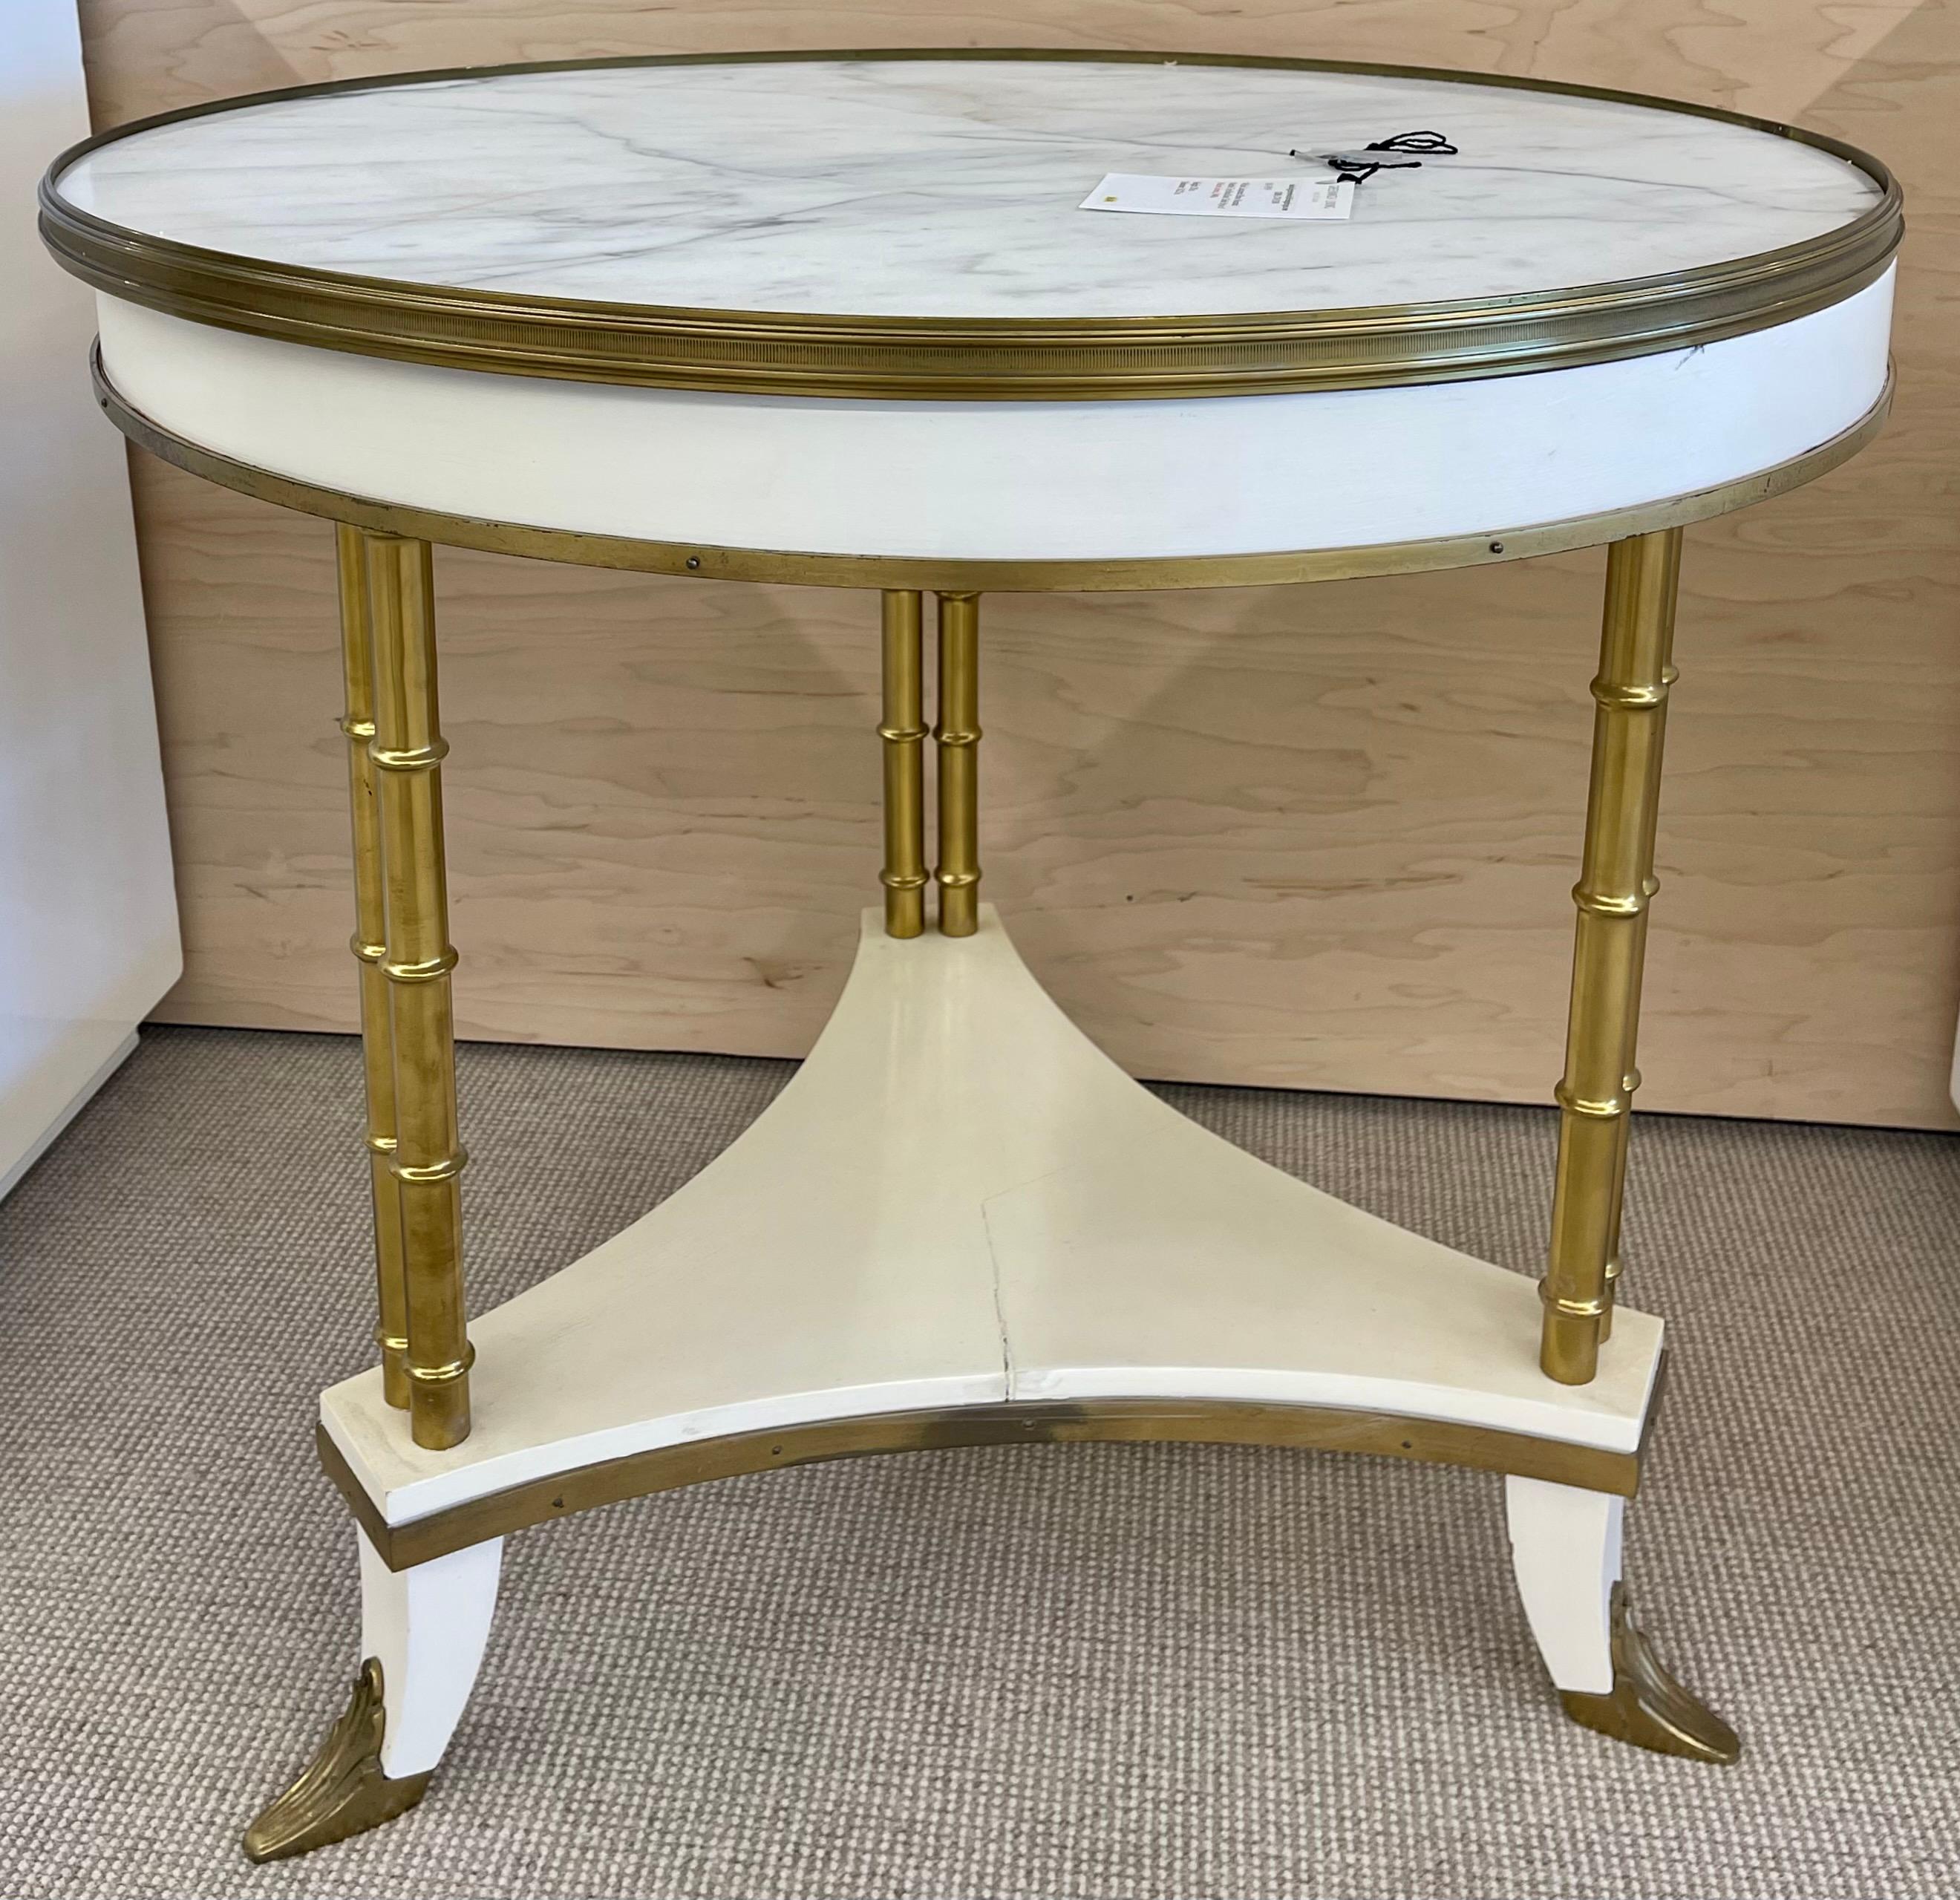 Fine white lacquered Hollywood Regency brass-mounted bouilliote, end or center table in the style of Maison Jansen. This spectacular center or end table is stunning having a bronze framed white and gray veined marble top with a bronze framed apron